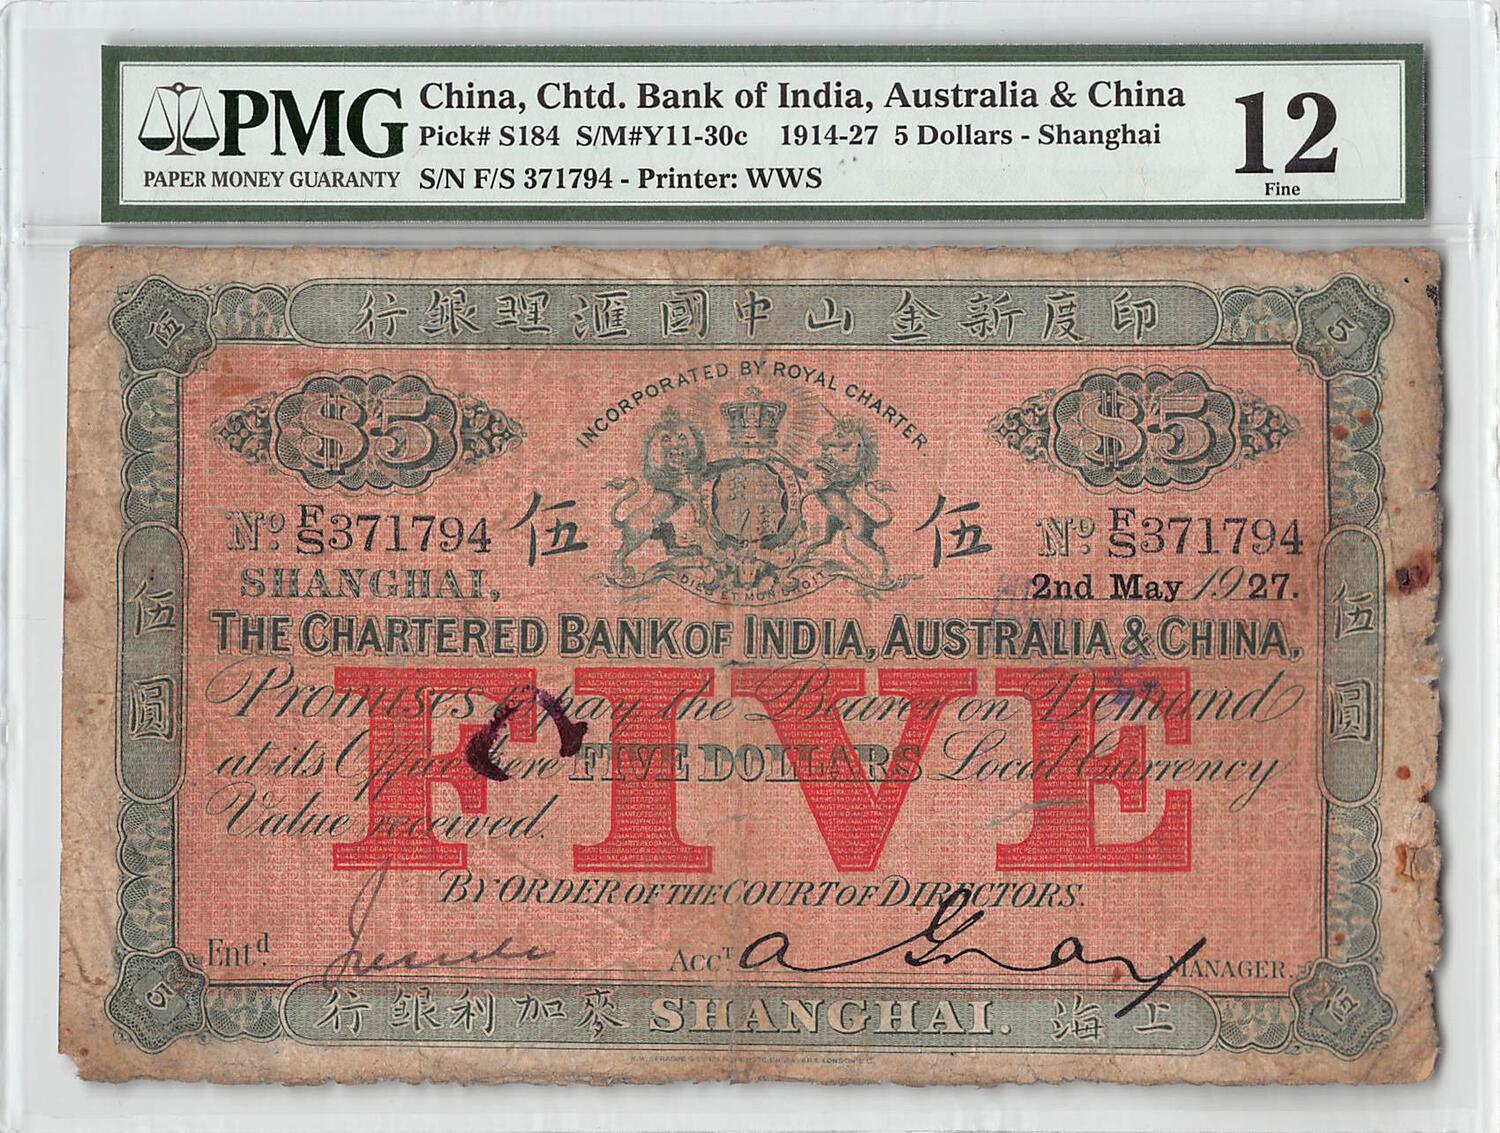 NumisBids: World Banknote Auctions Sale 6 (25 Mar 2021): China